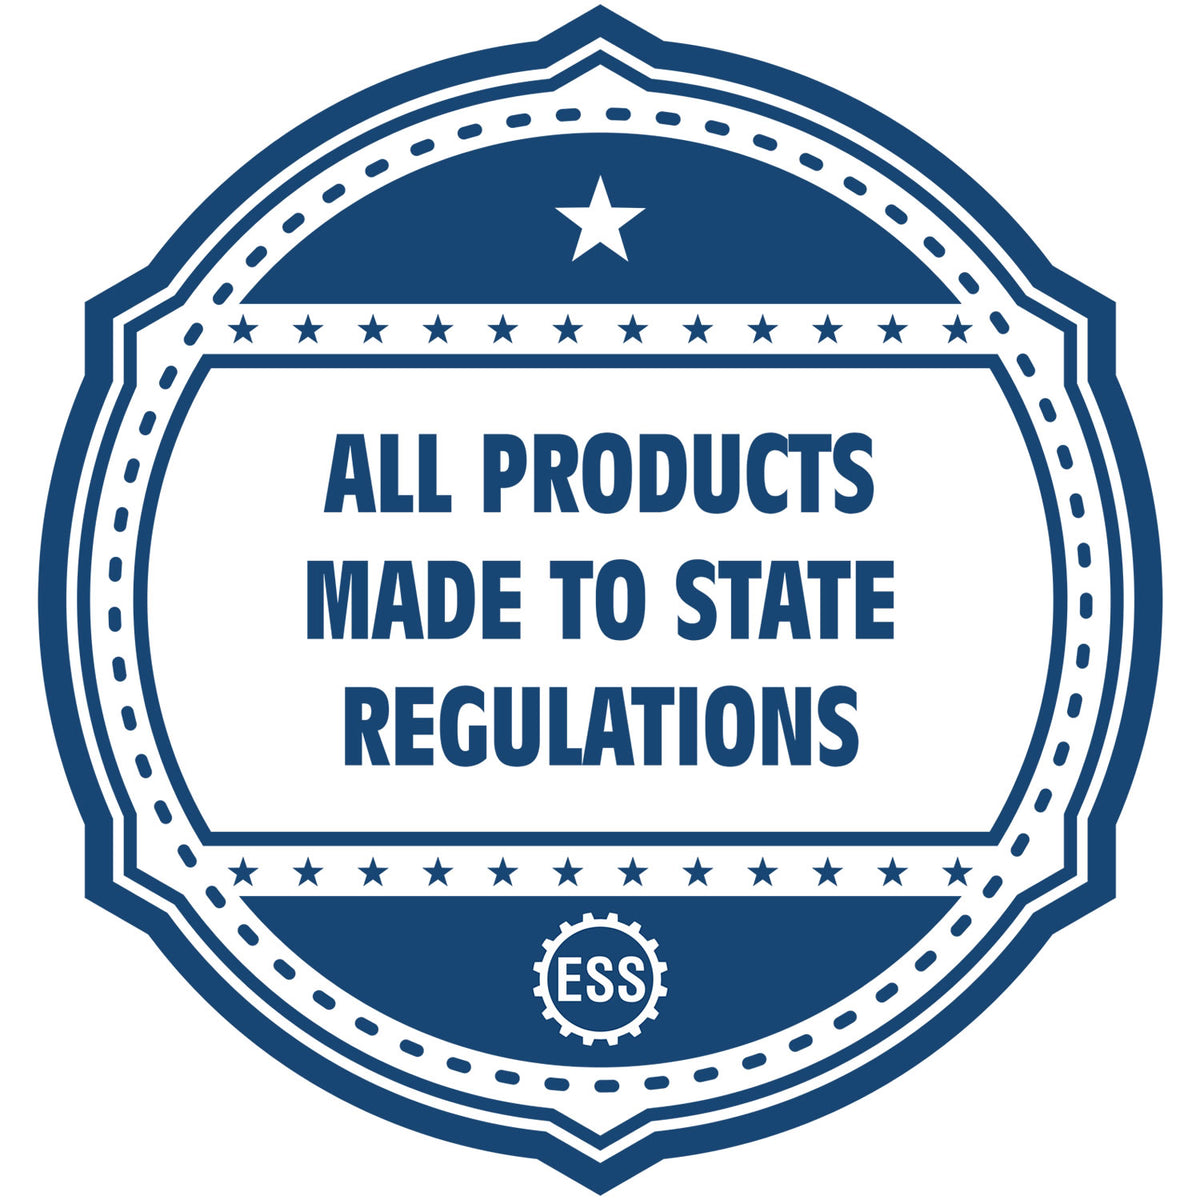 An icon or badge element for the Wooden Handle New Mexico State Seal Notary Public Stamp showing that this product is made in compliance with state regulations.